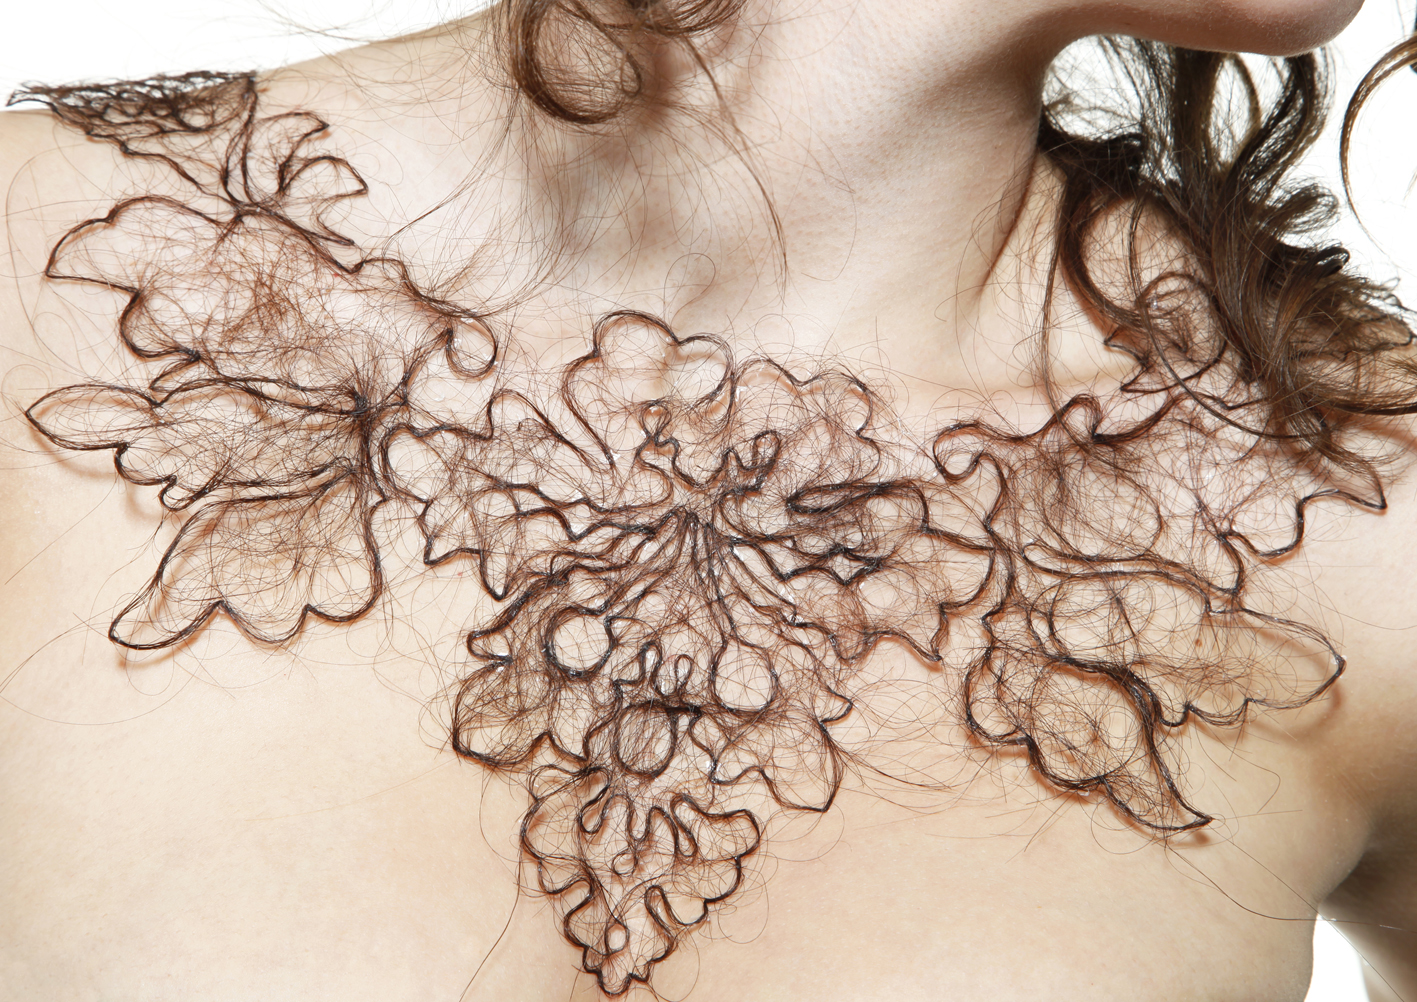 Kerry Howley BA Jewellery Middlesex Uni 'AttractionAversion' Hair Necklace 3 High Res